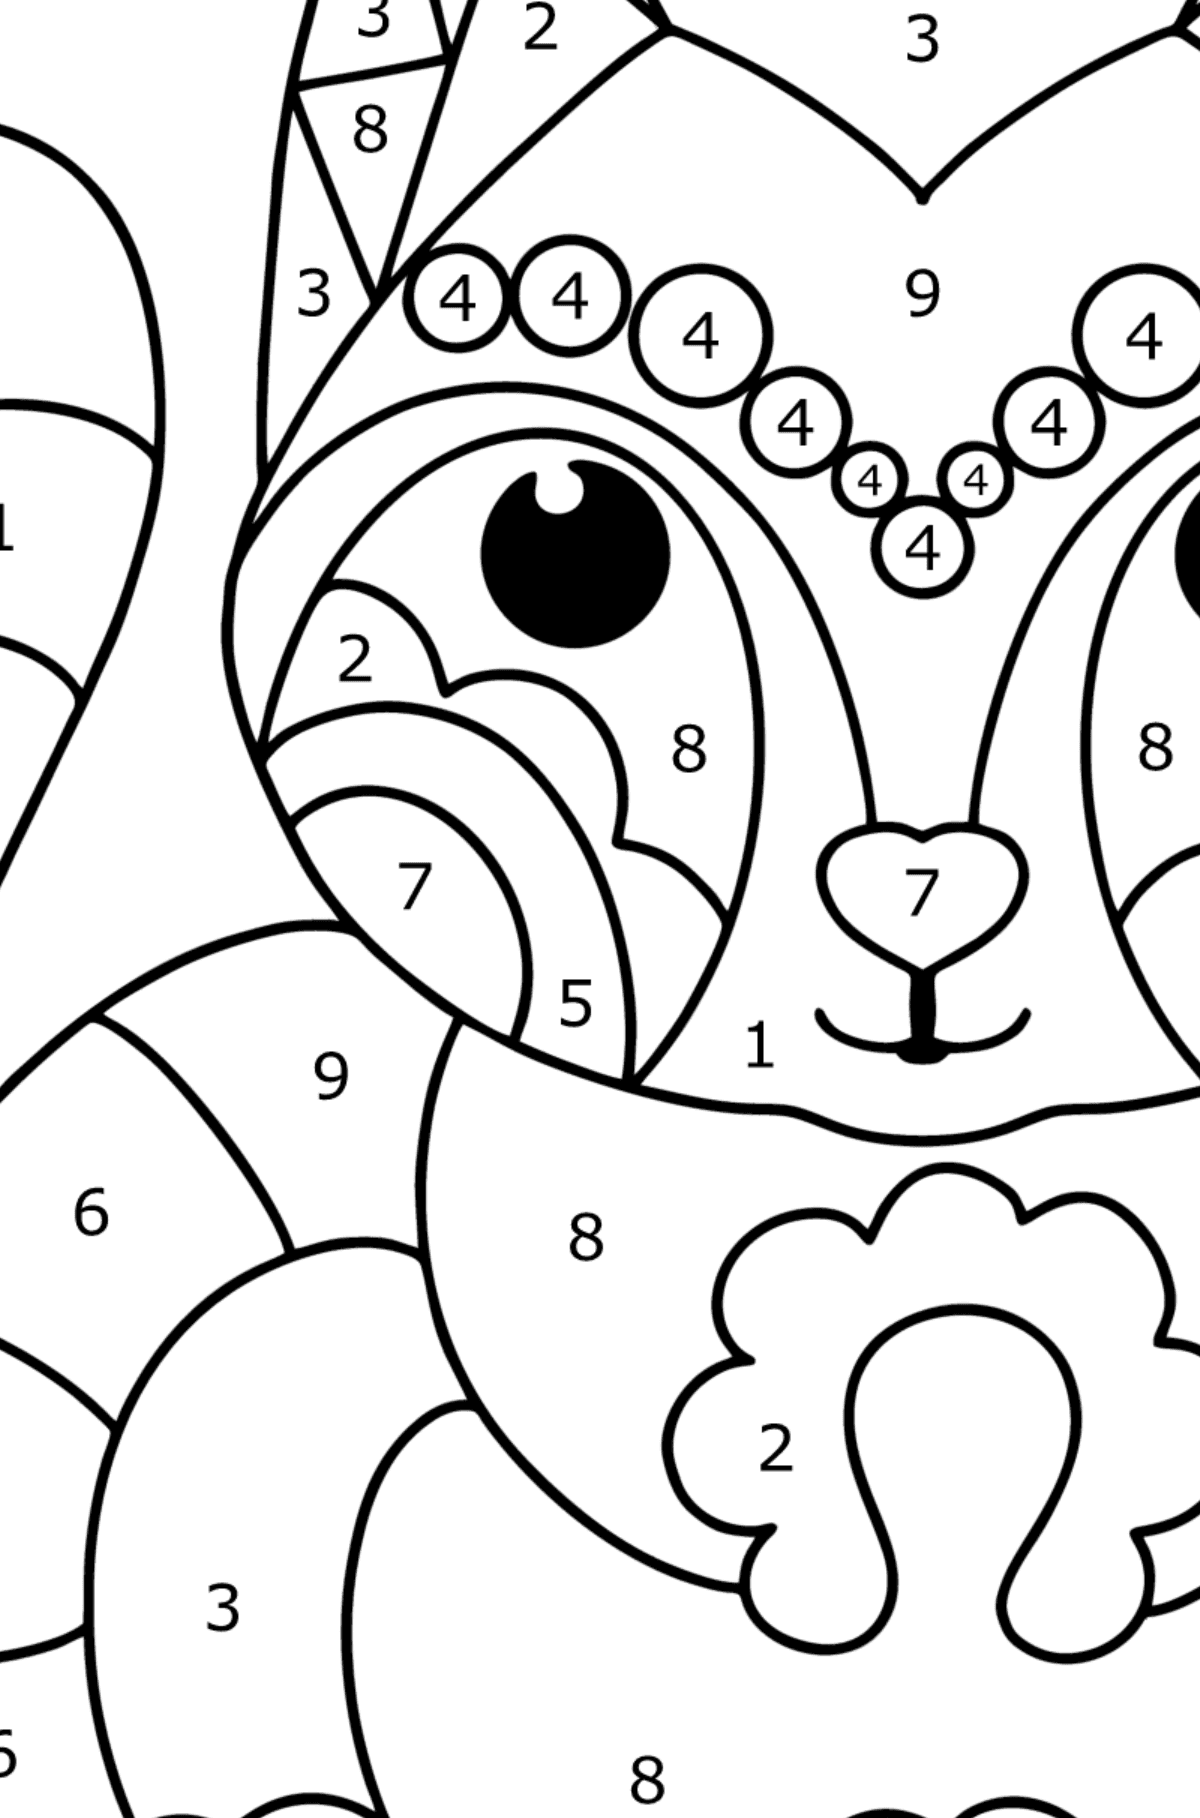 Coloring page Anti stress animals - raccoon - Coloring by Numbers for Kids